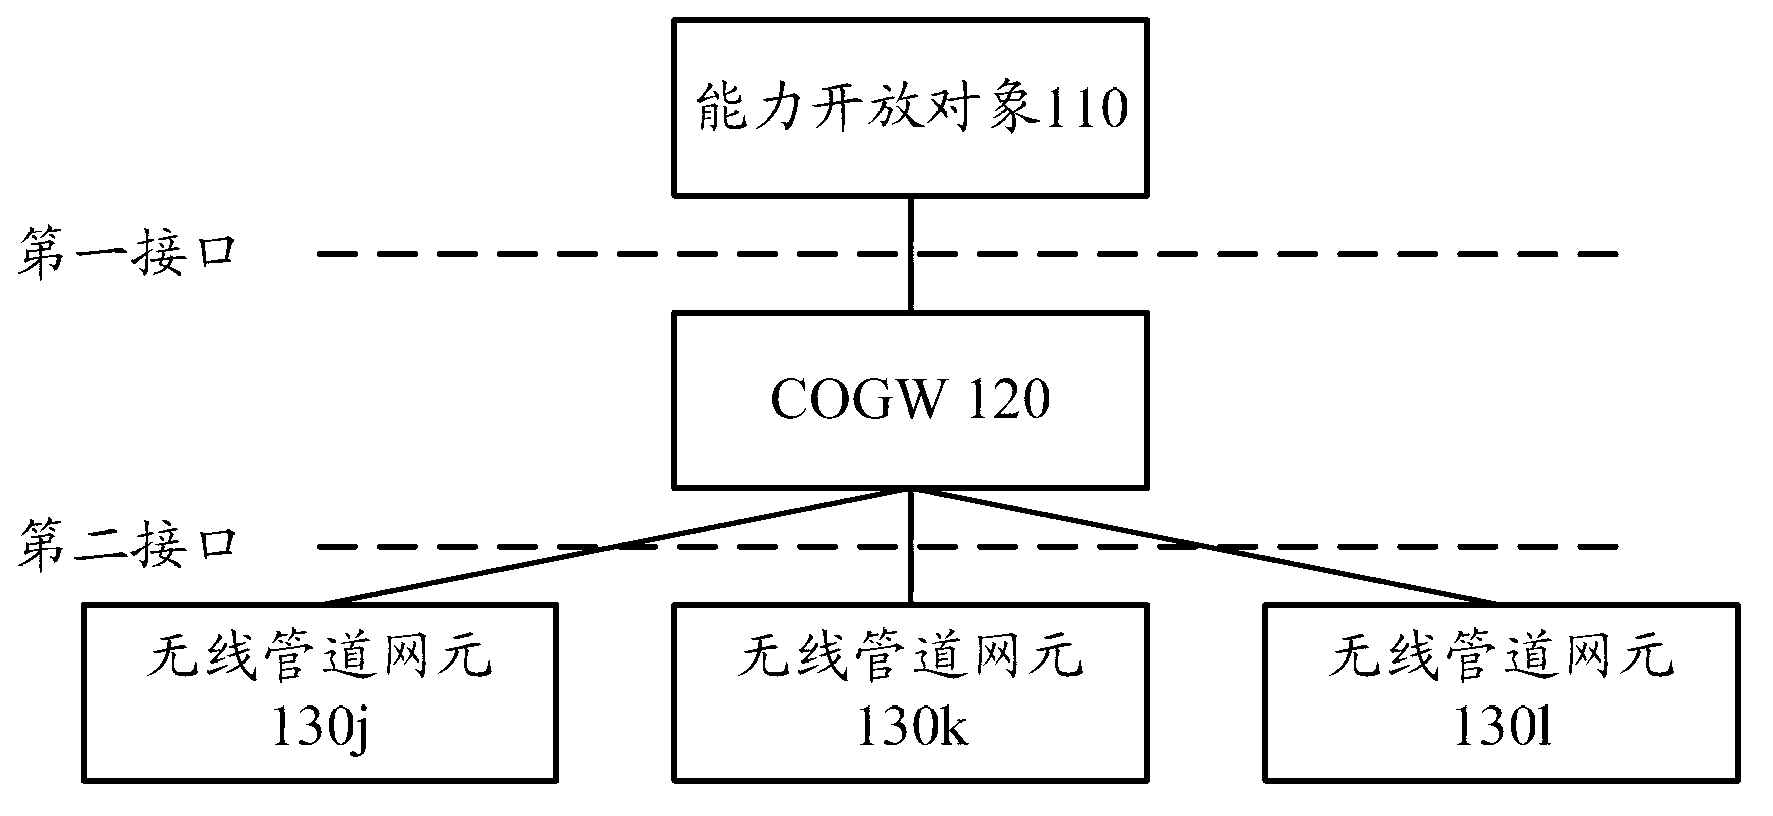 Communication system, capability open gateway and method for opening wireless-pipeline capability